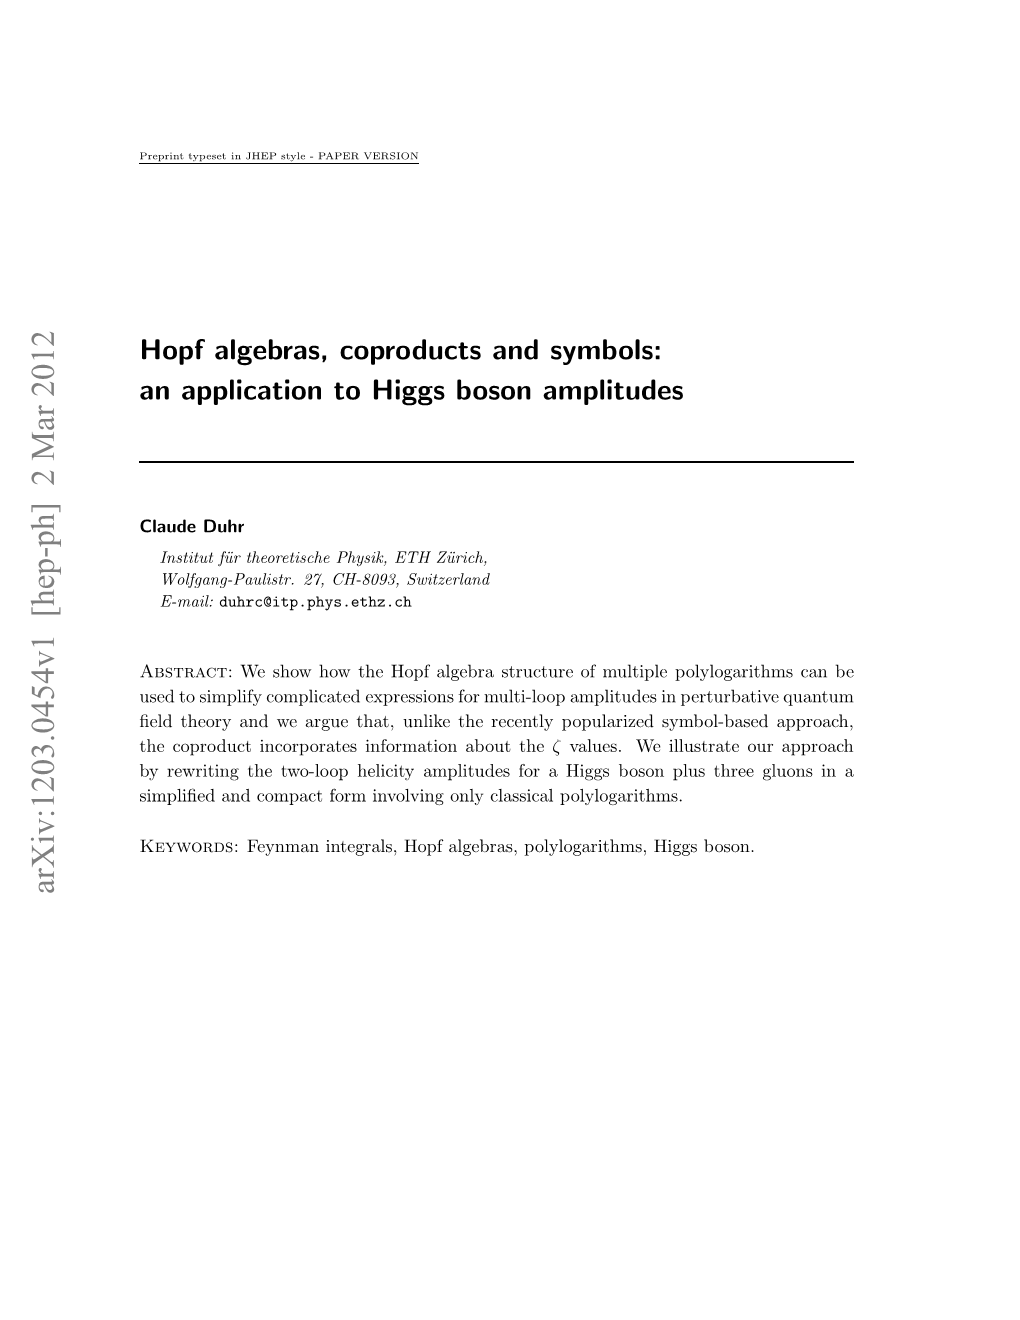 Hopf Algebras, Coproducts and Symbols: an Application to Higgs Boson Amplitudes